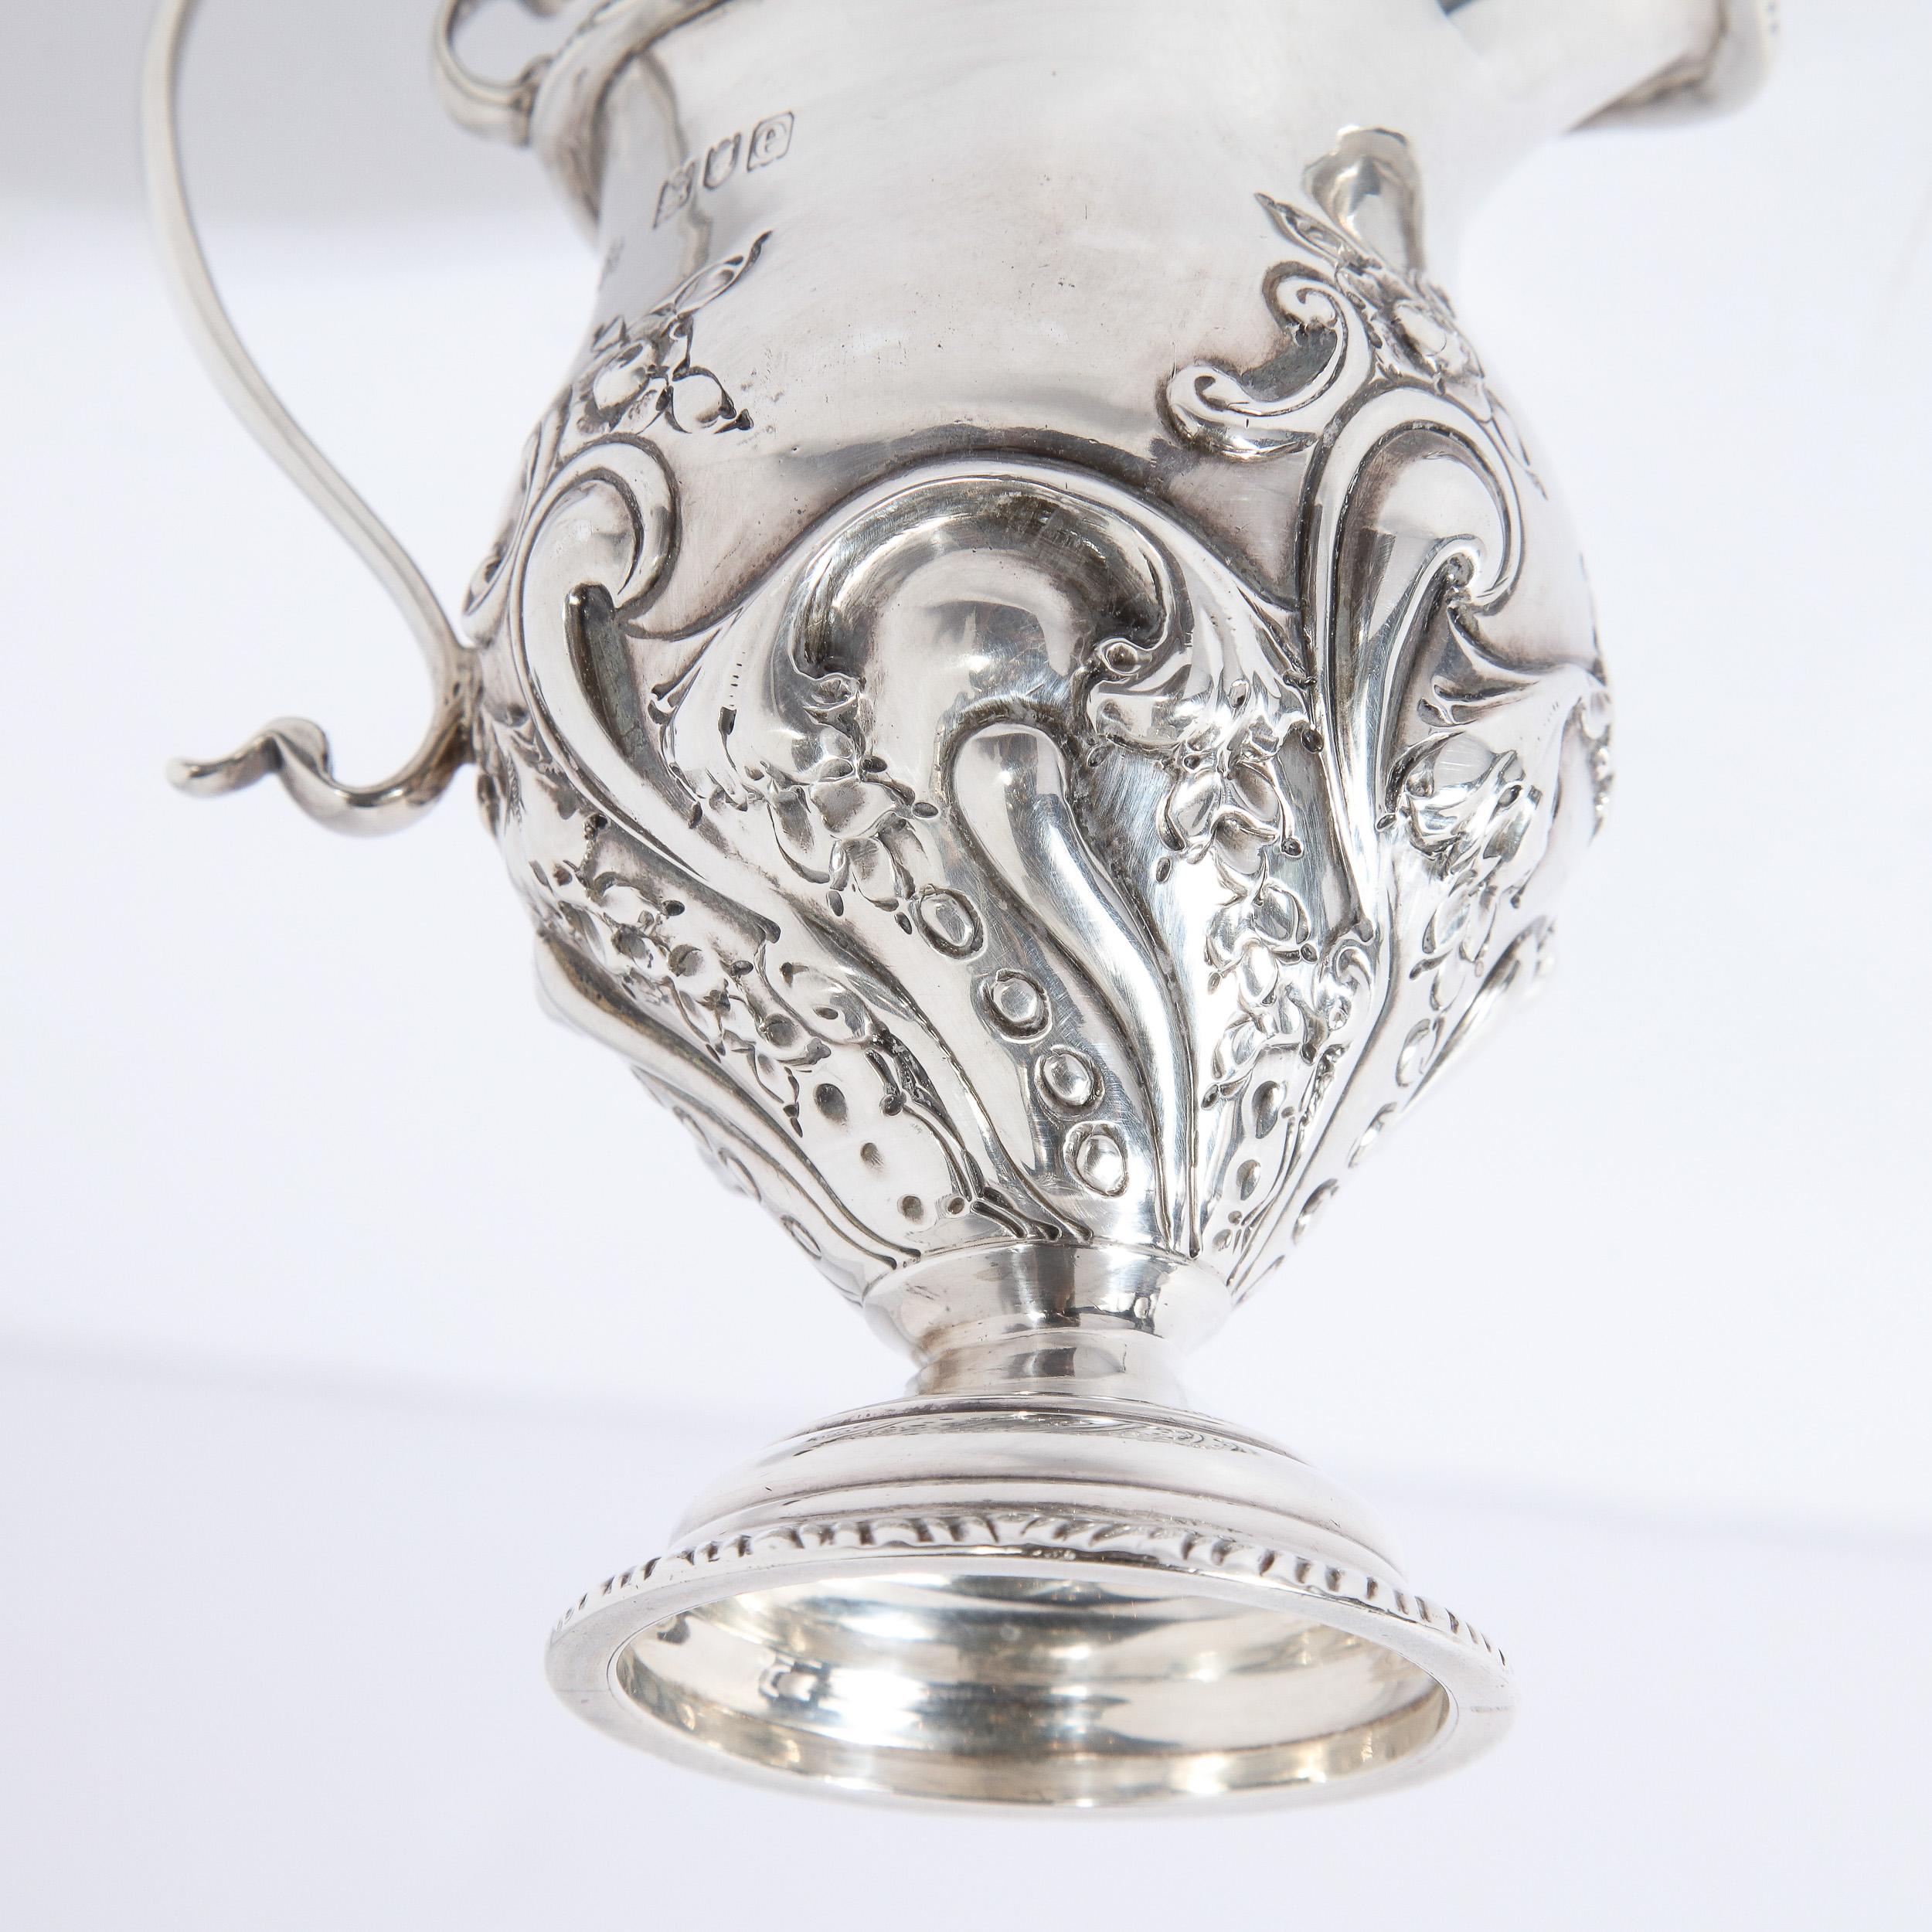 Victorian Silverplate Creamer by Charles Pilling for Sibray, Hall & Co Ltd  1